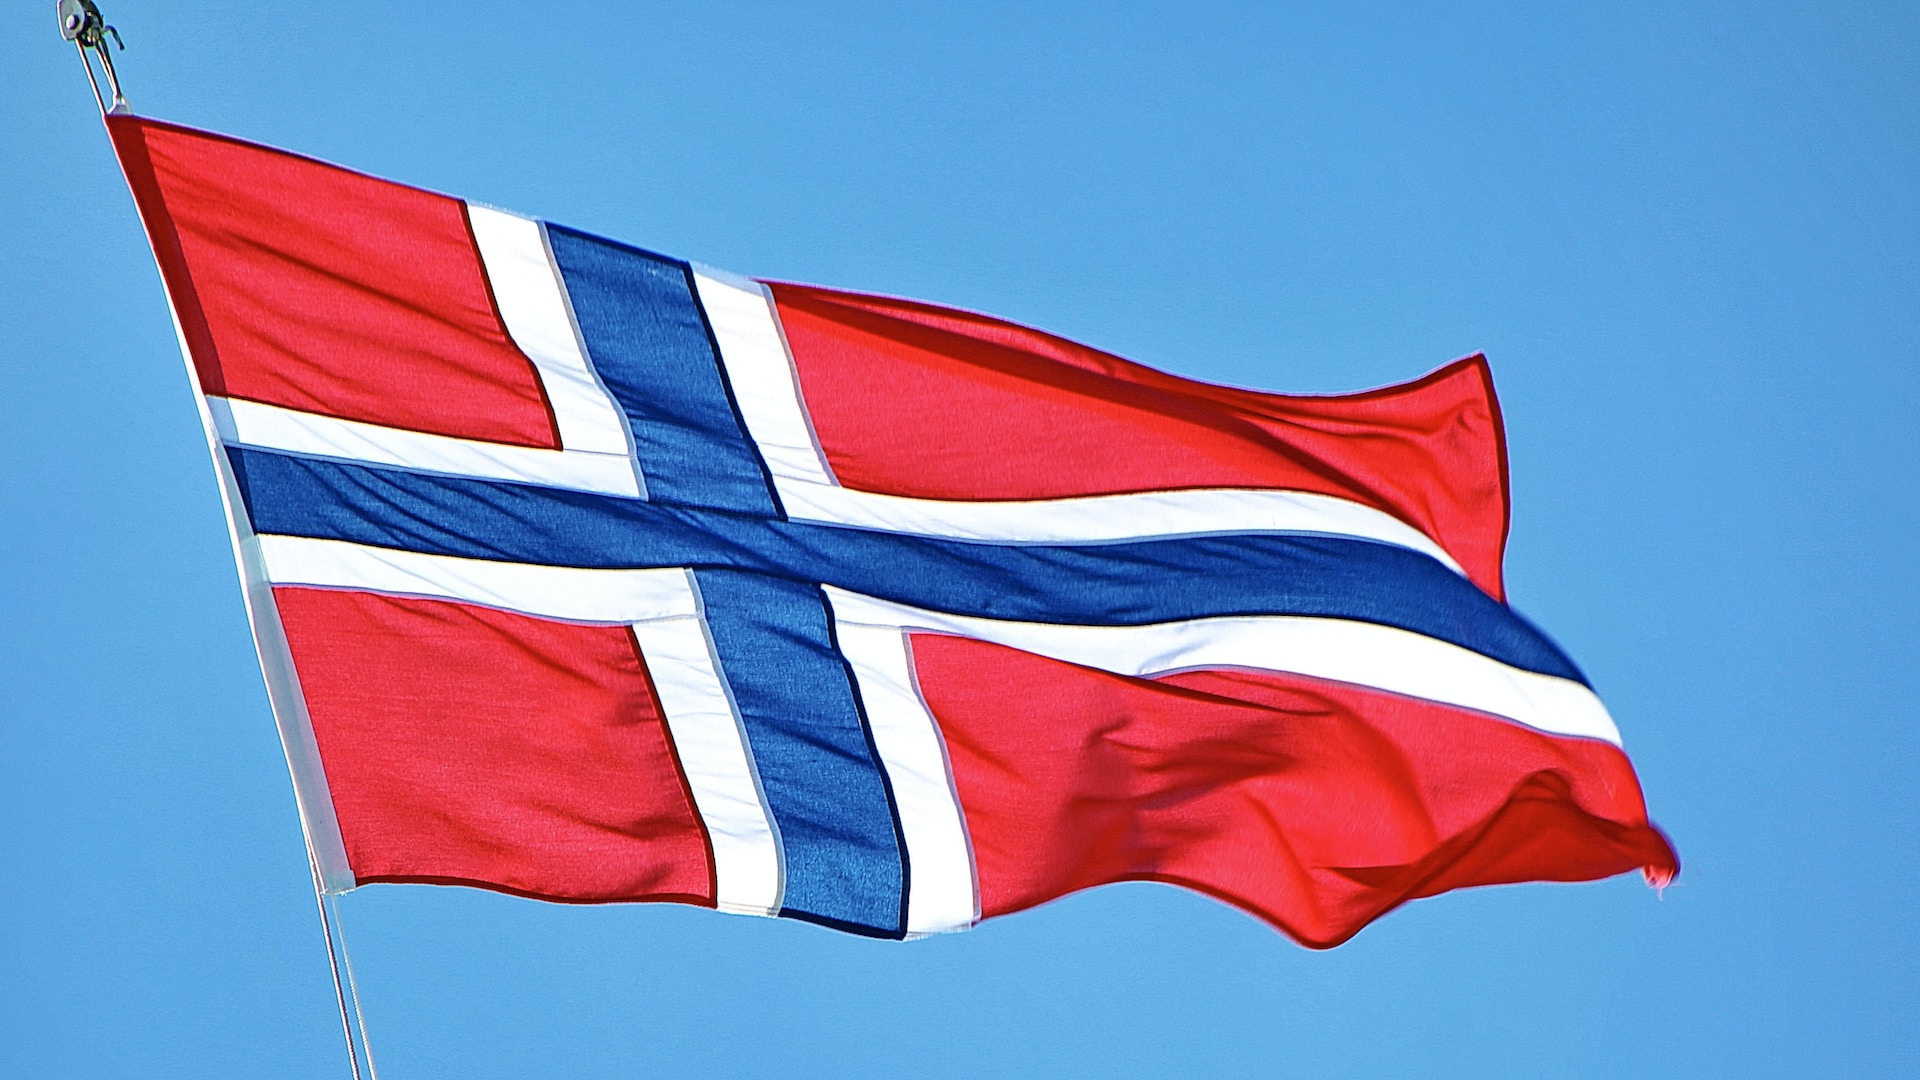 No More Strike for Offshore Oil and Gas Workers in Norway